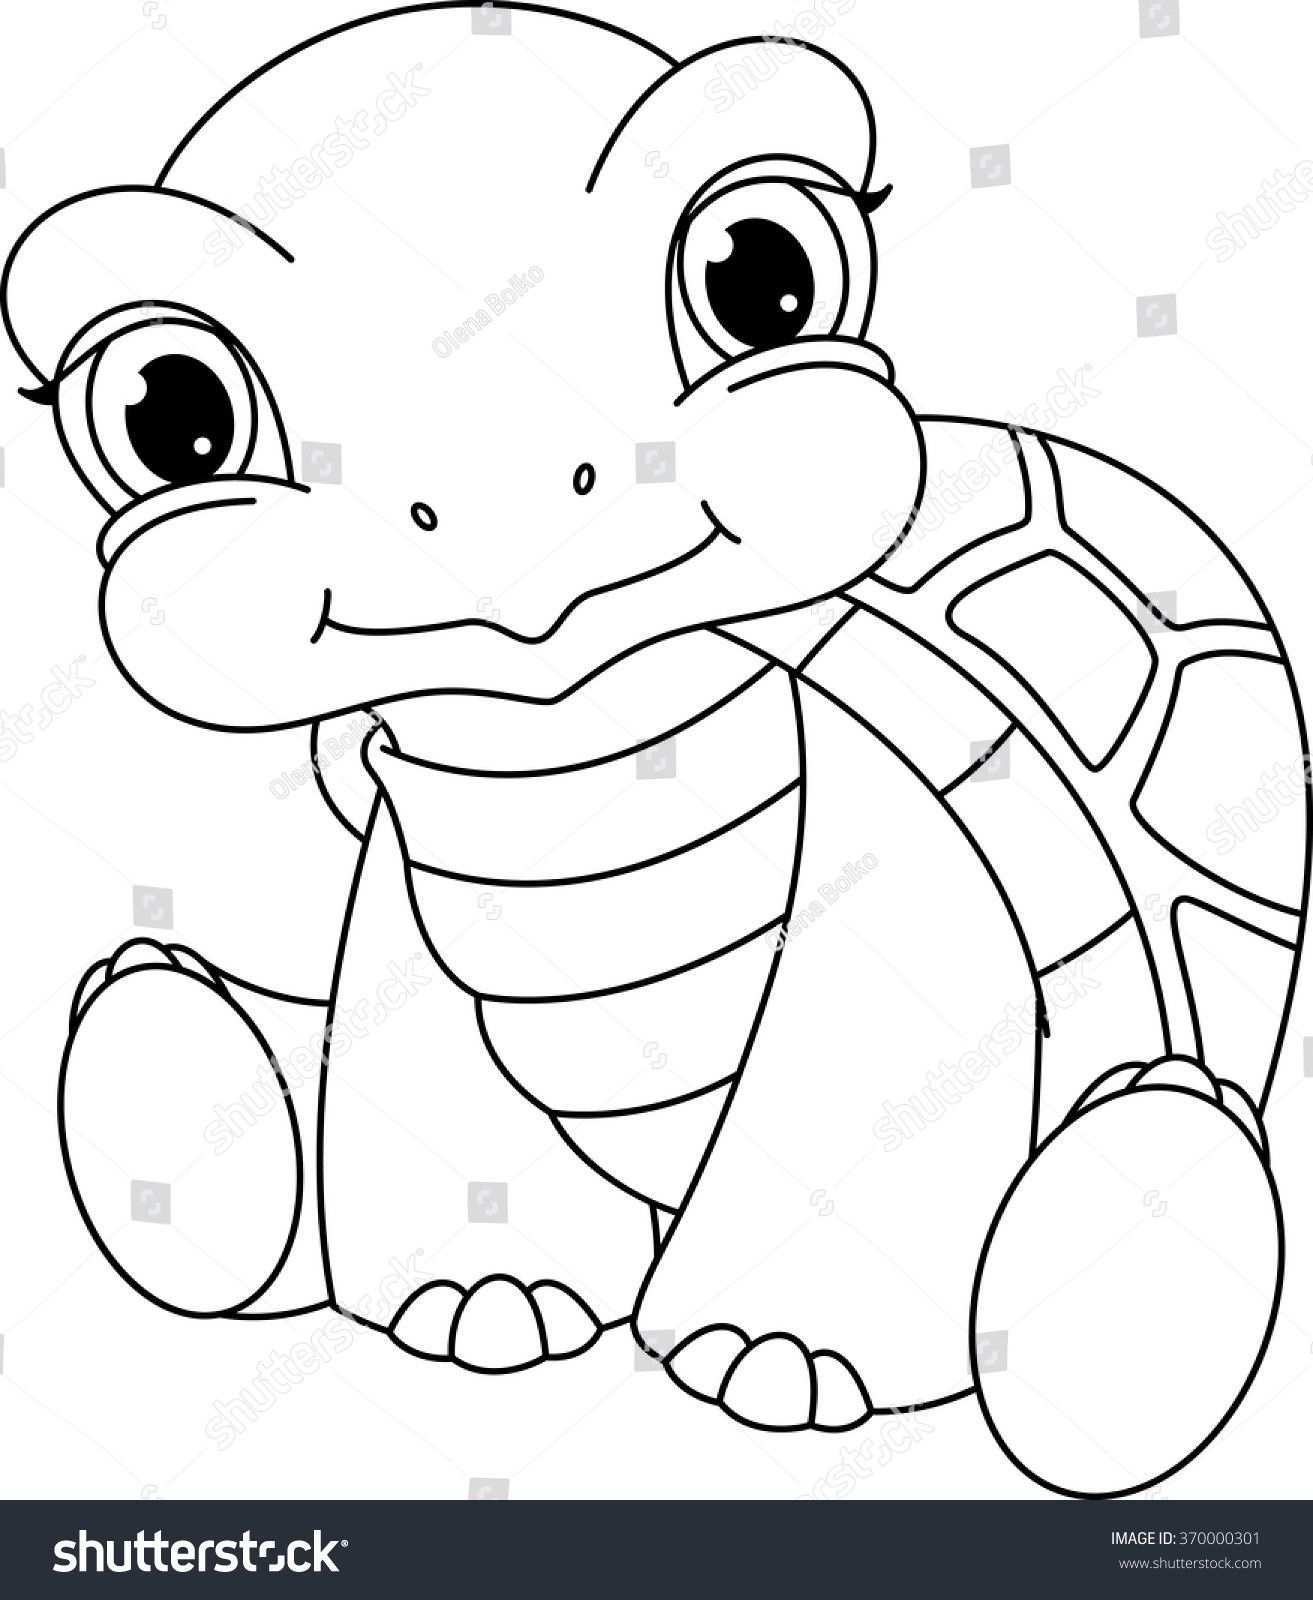 Baby Turtle Coloring Page Youngandtae Com In 2020 Turtle Coloring Pages Baby Coloring